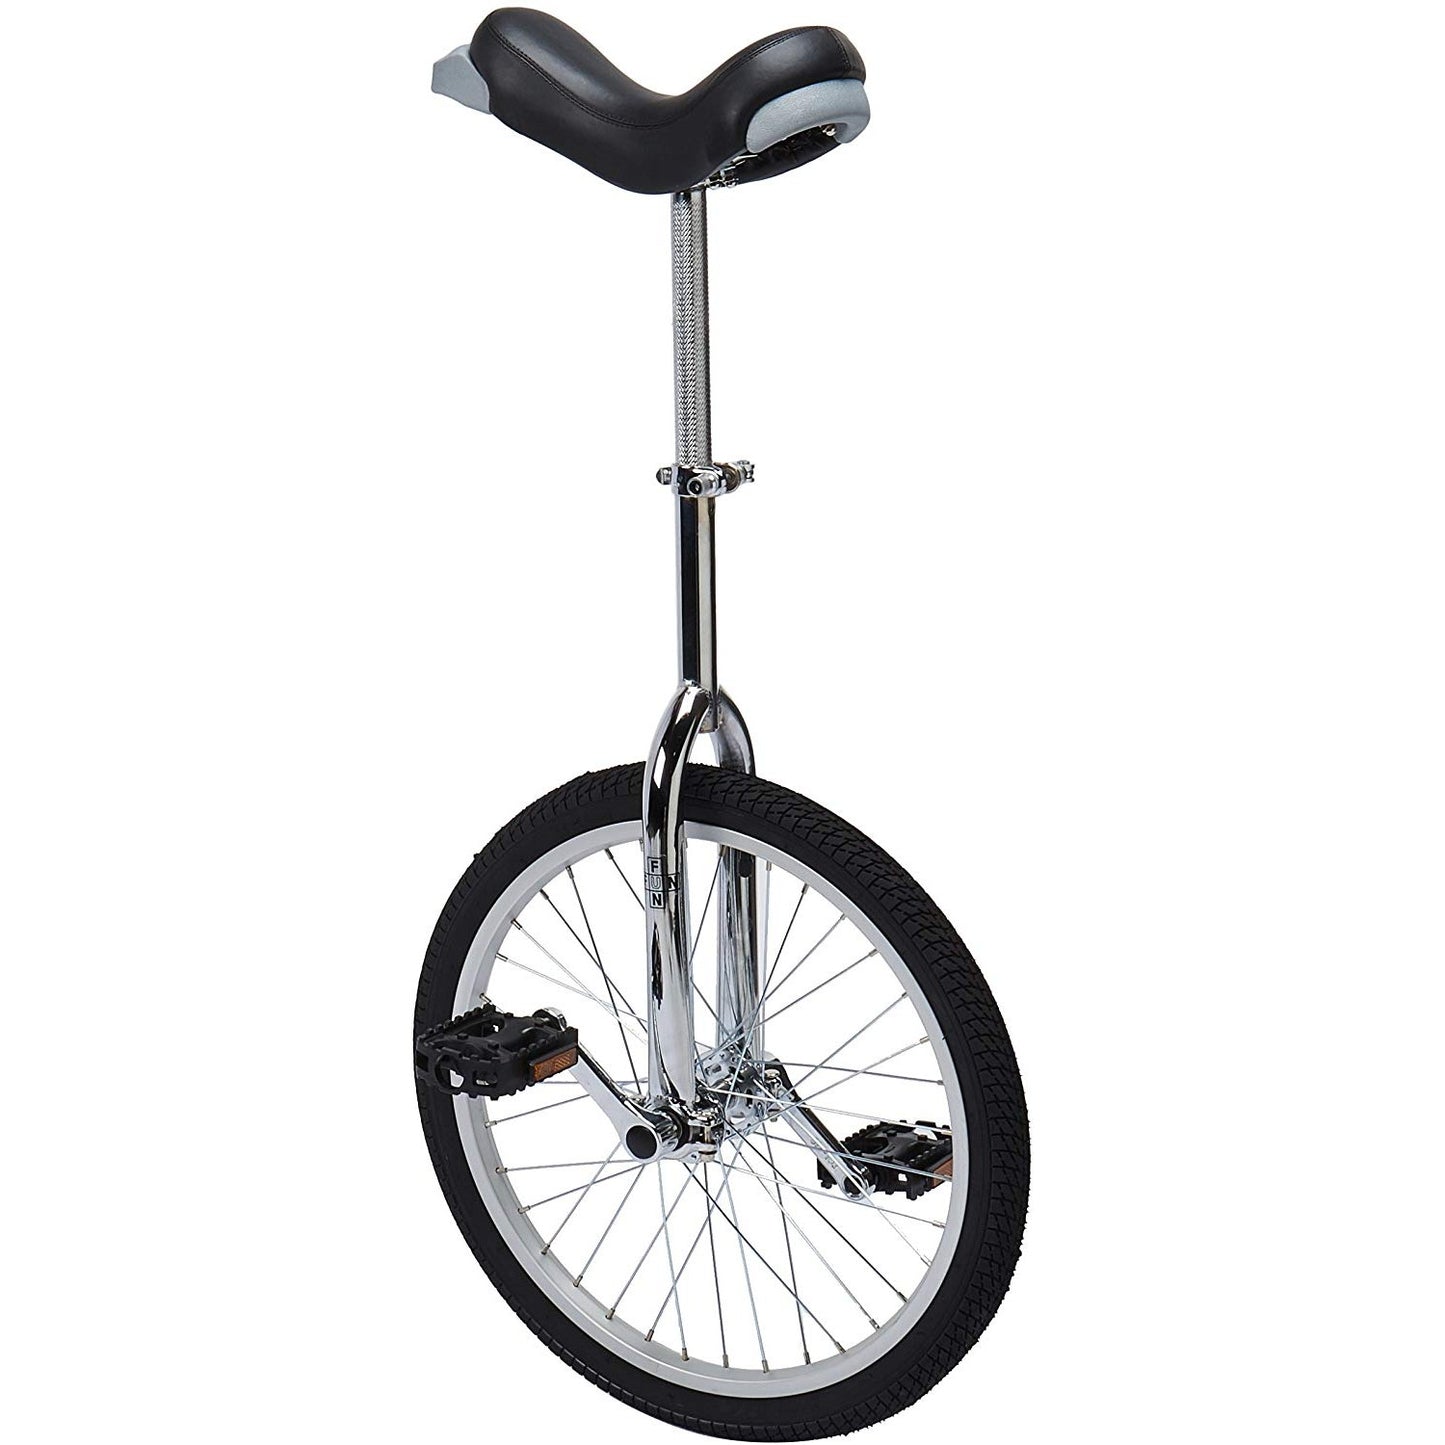 Beginners Unicycle - oddgifts.com